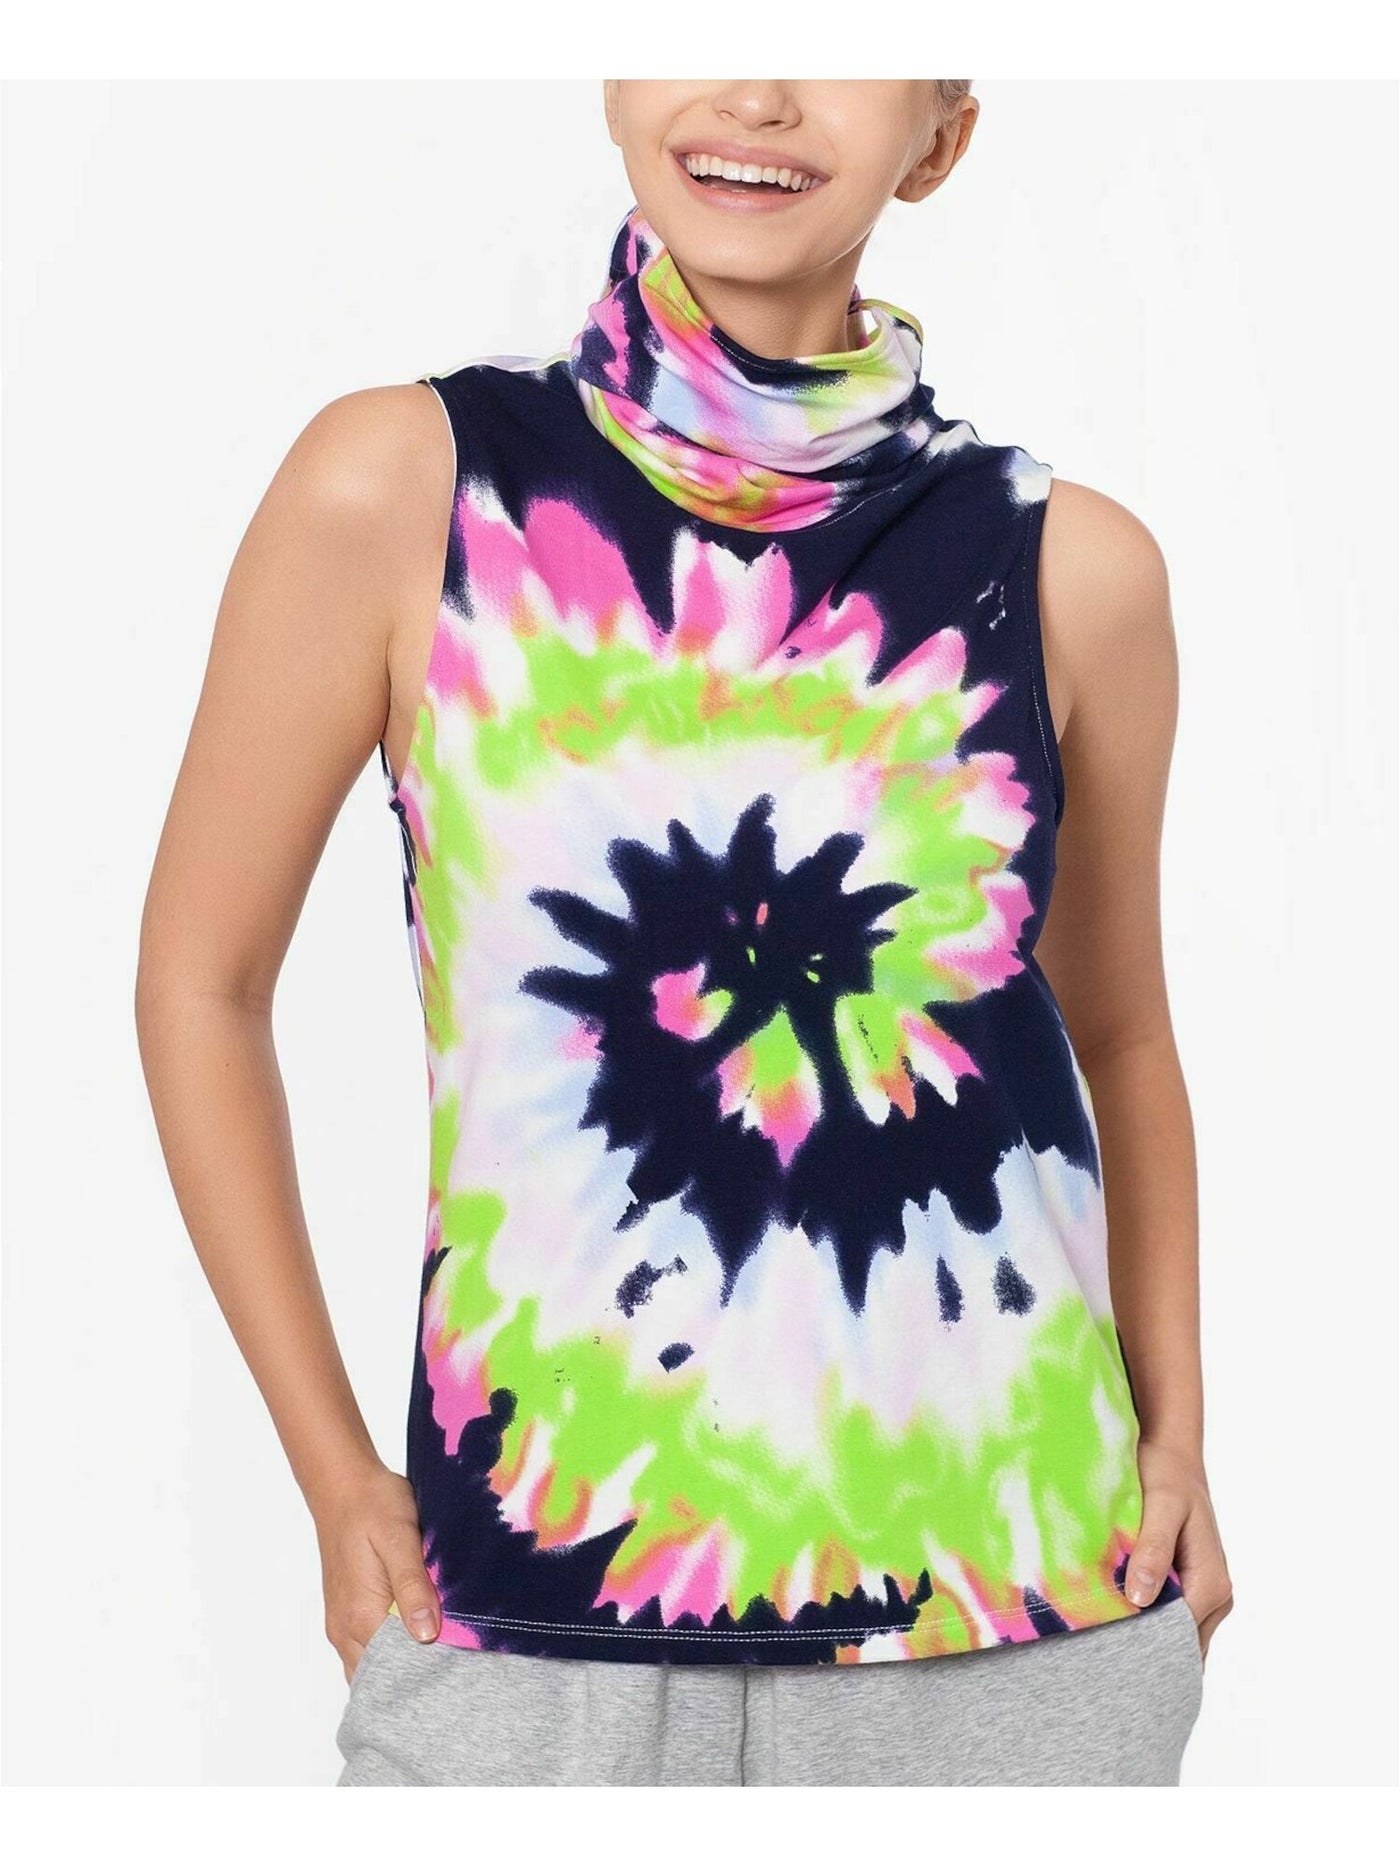 BAM BY BETSY & ADAM Womens White Built-in Mask Tie Dye Sleeveless Tank Top S